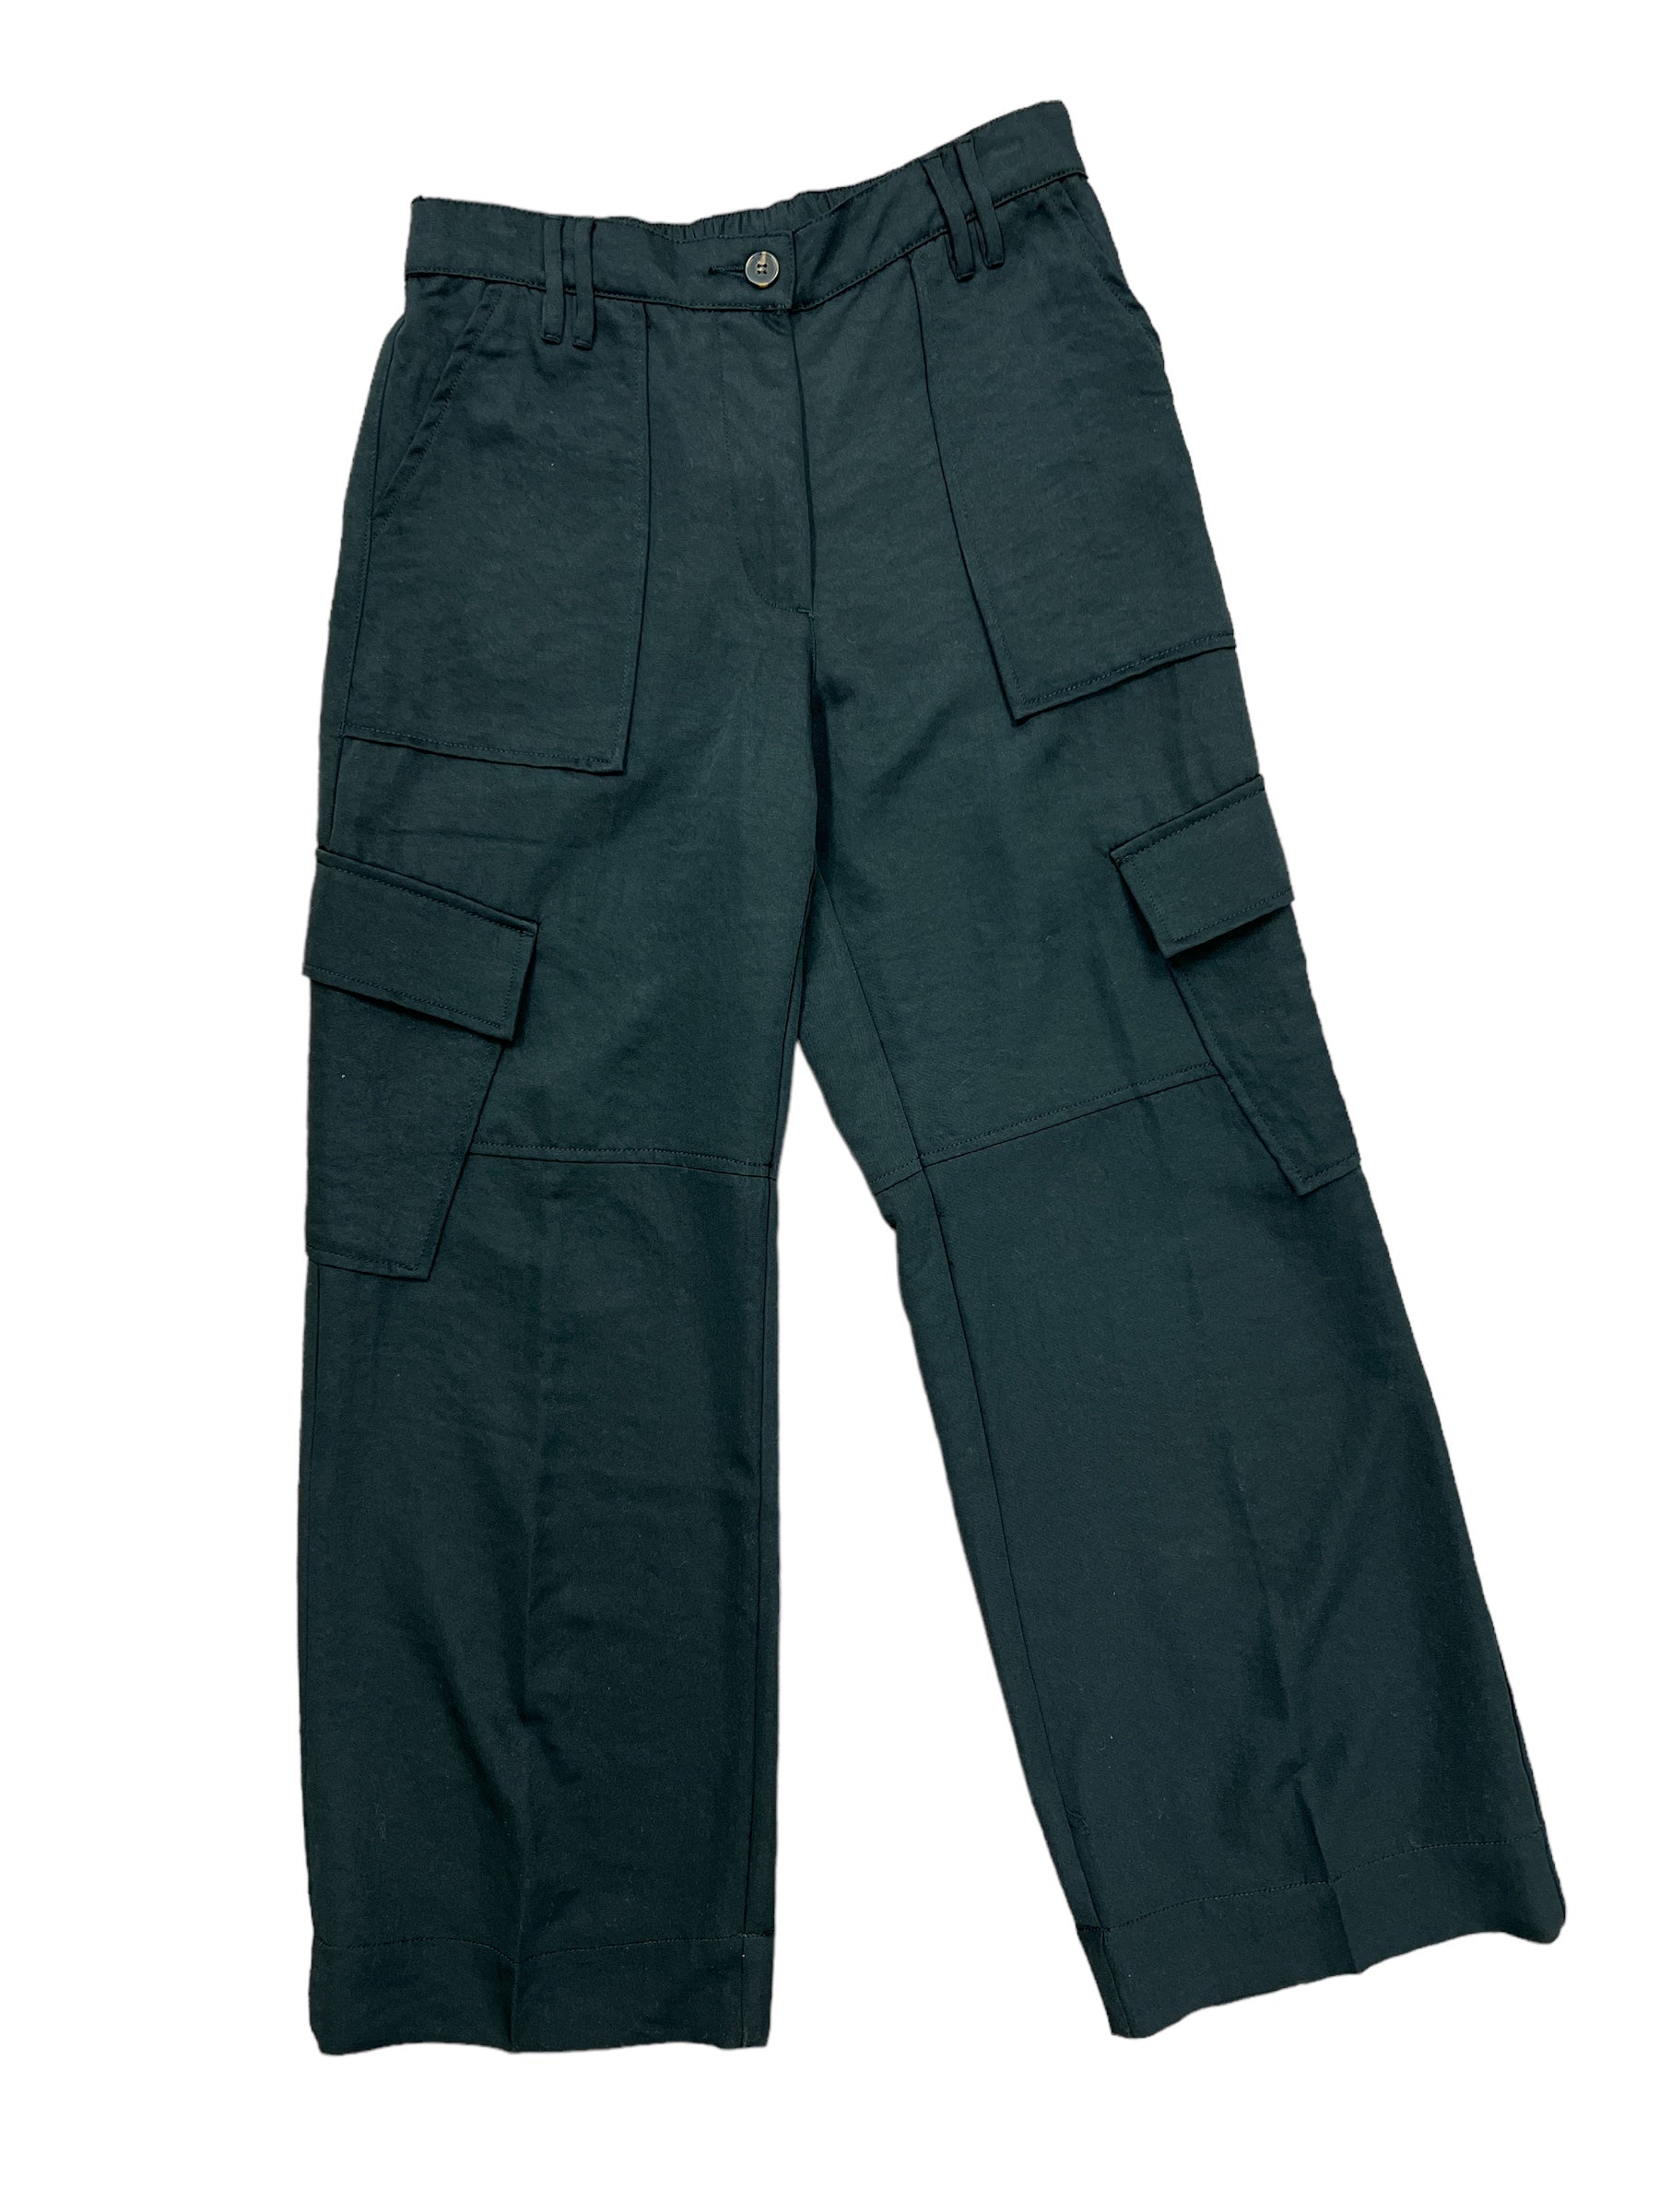 Cairo Cargo Pant-230 Pants-Simply Stylish Boutique-Simply Stylish Boutique | Women’s & Kid’s Fashion | Paducah, KY